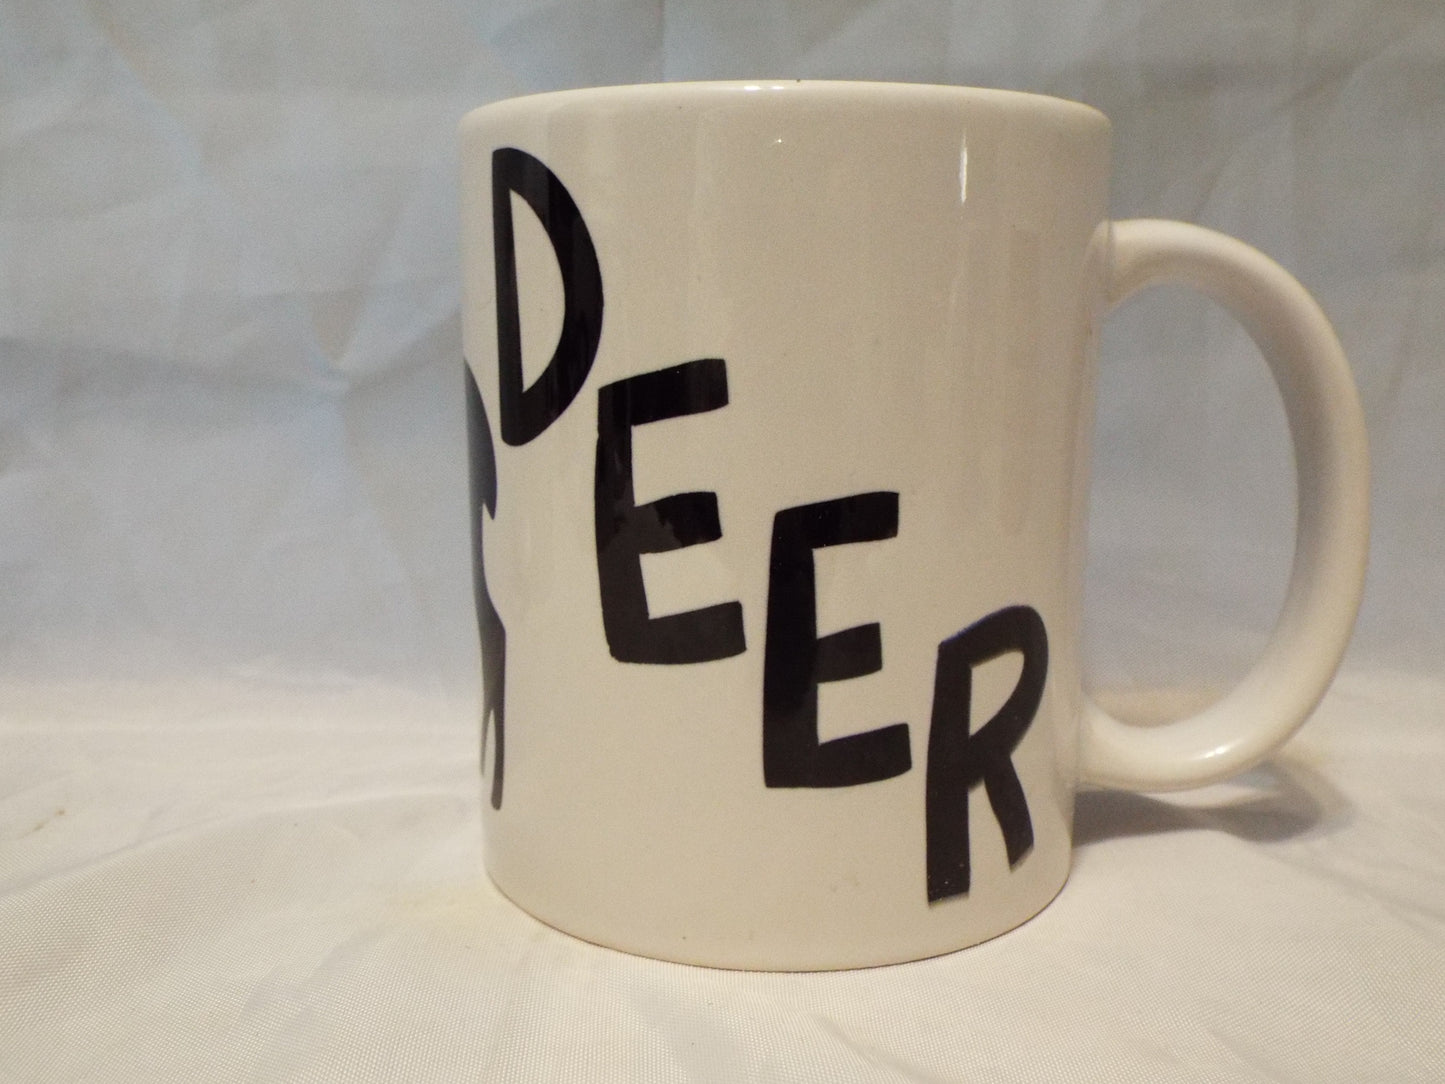 "Oh Deer" with trees and deer no wrap